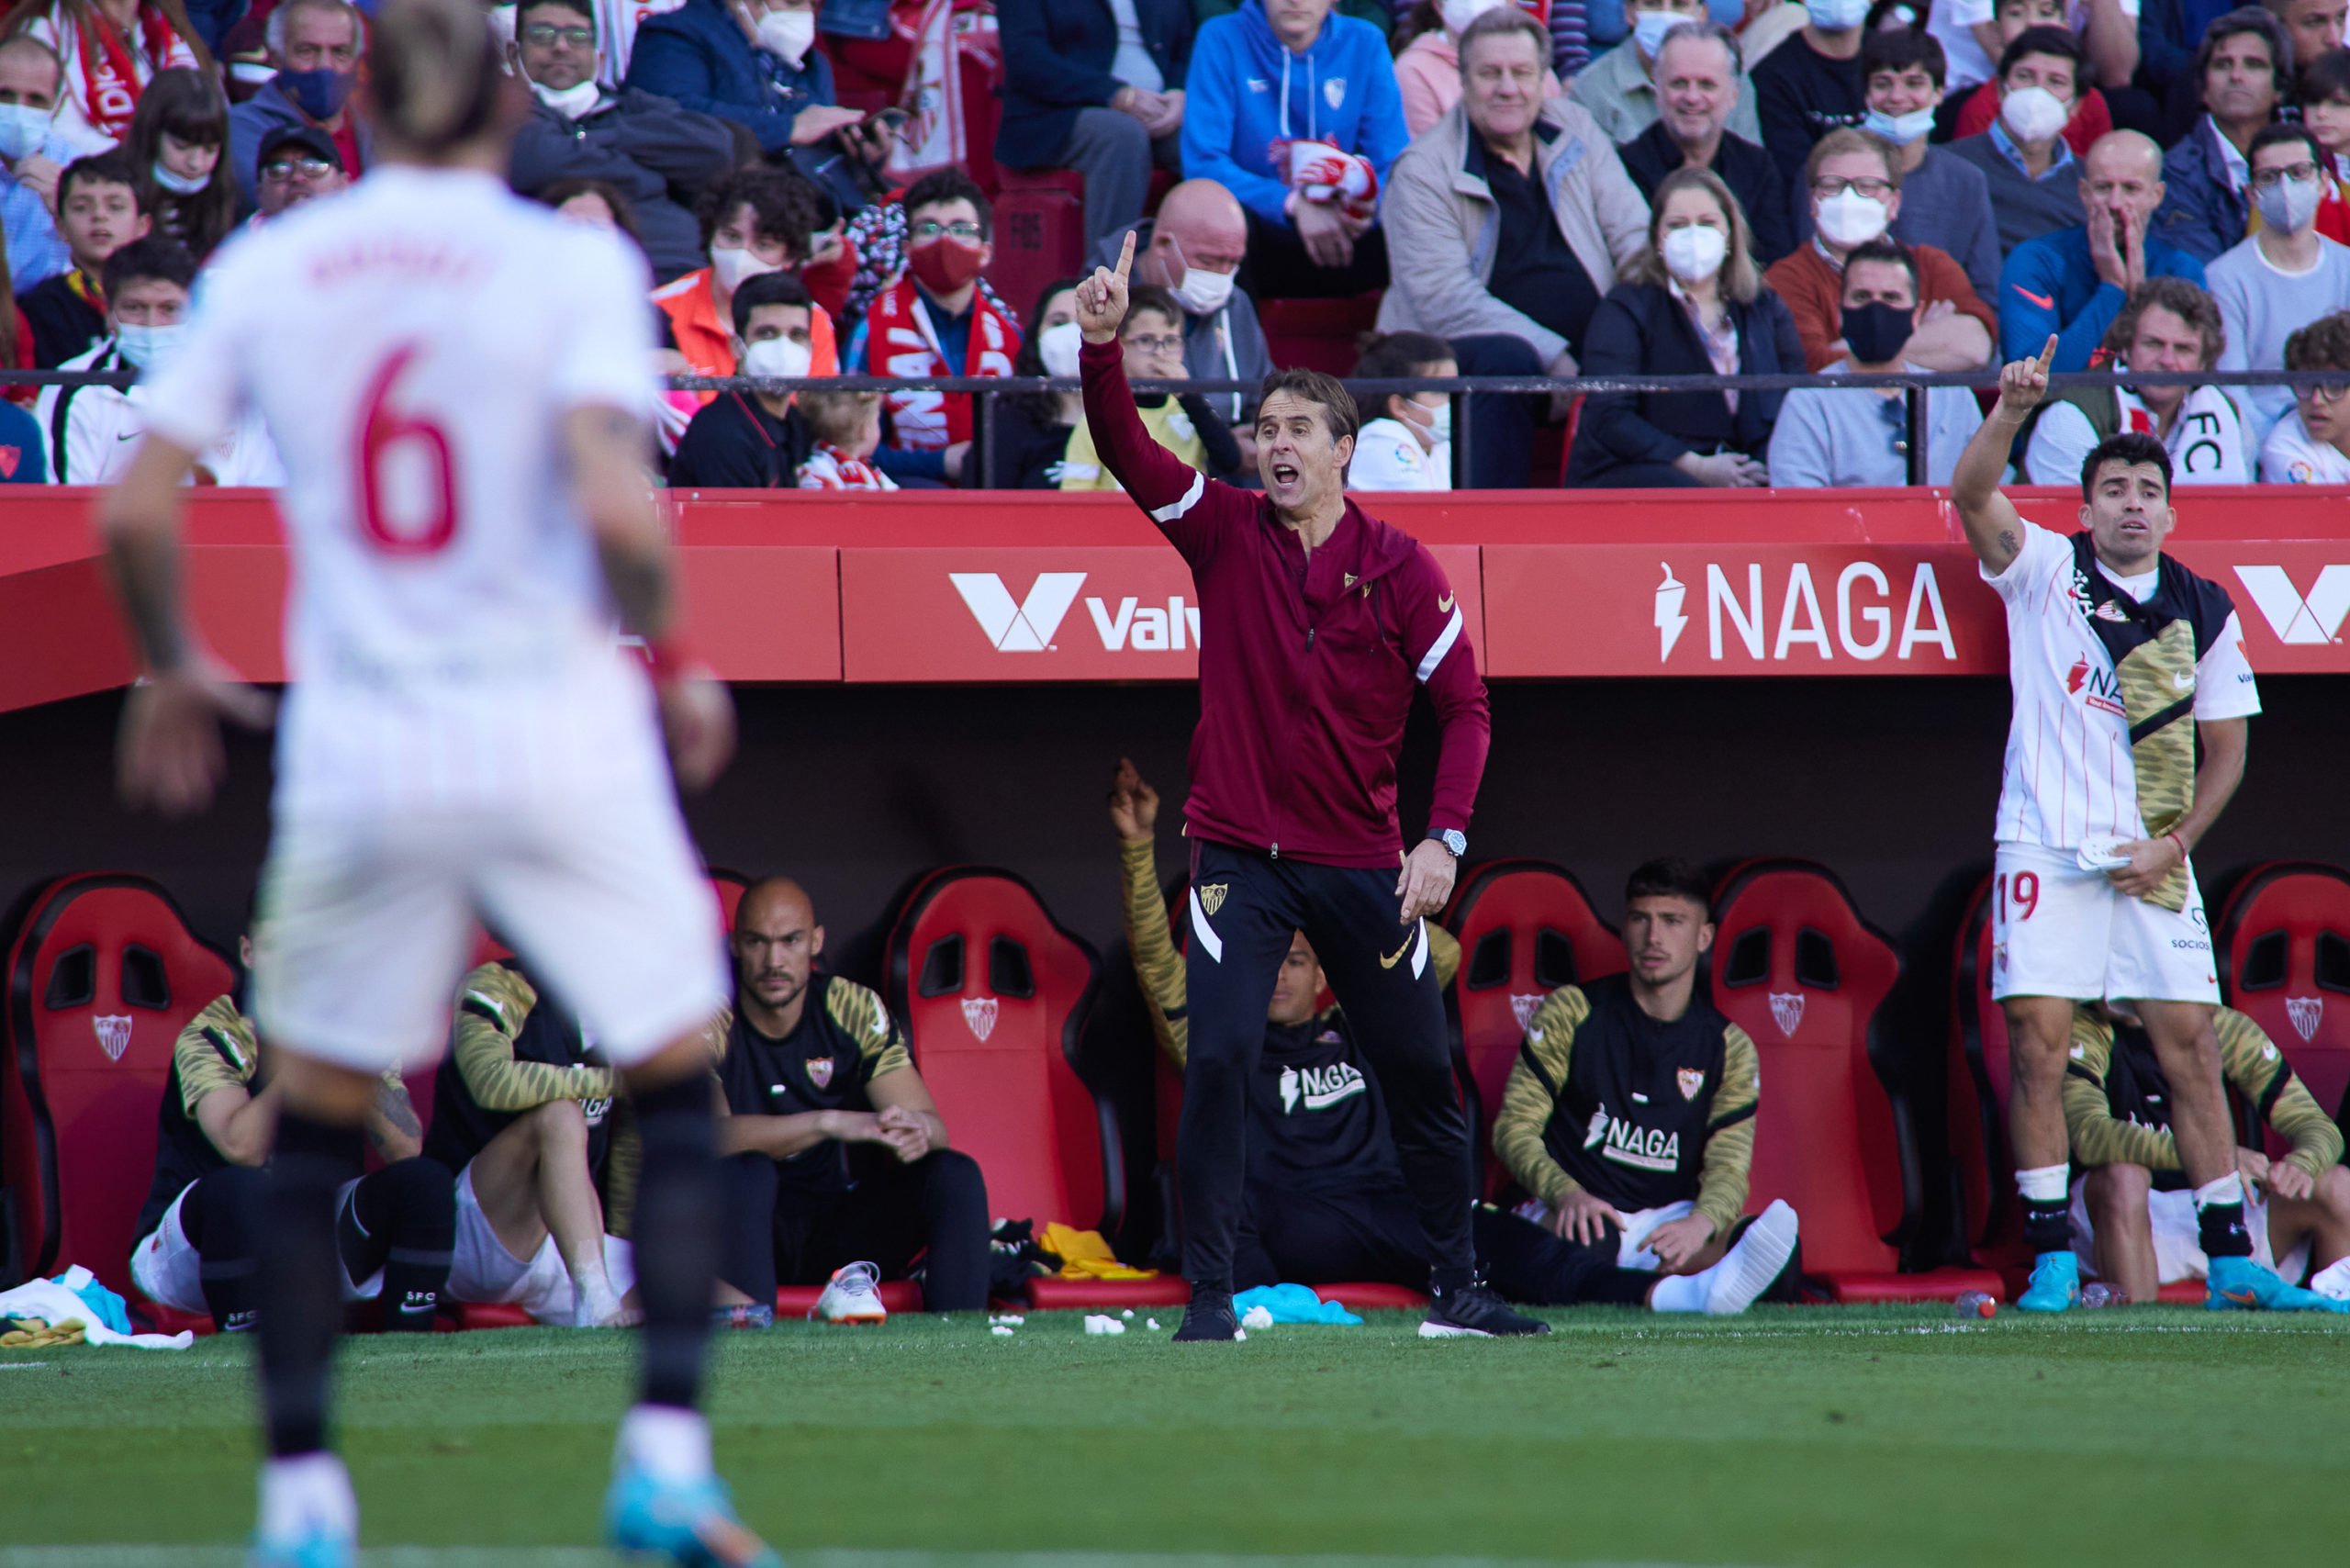 Spanish report shares huge blow for Sevilla, nine key players could miss Europa League clash with West Ham